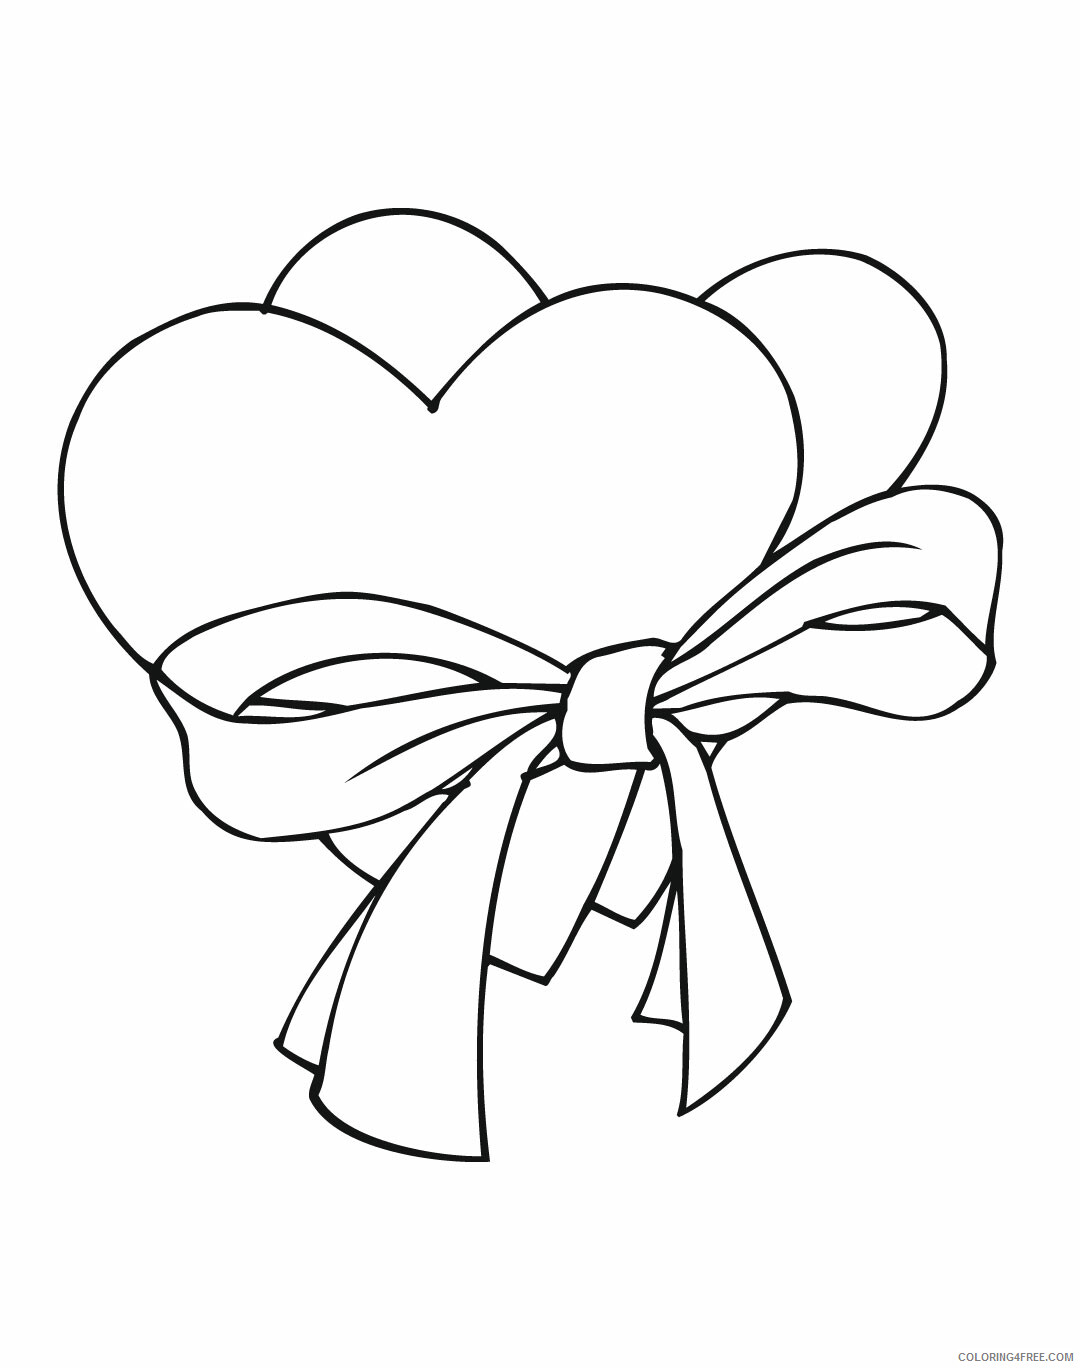 Heart Coloring Pages Heart For Kids Printable 2021 3159 Coloring4free